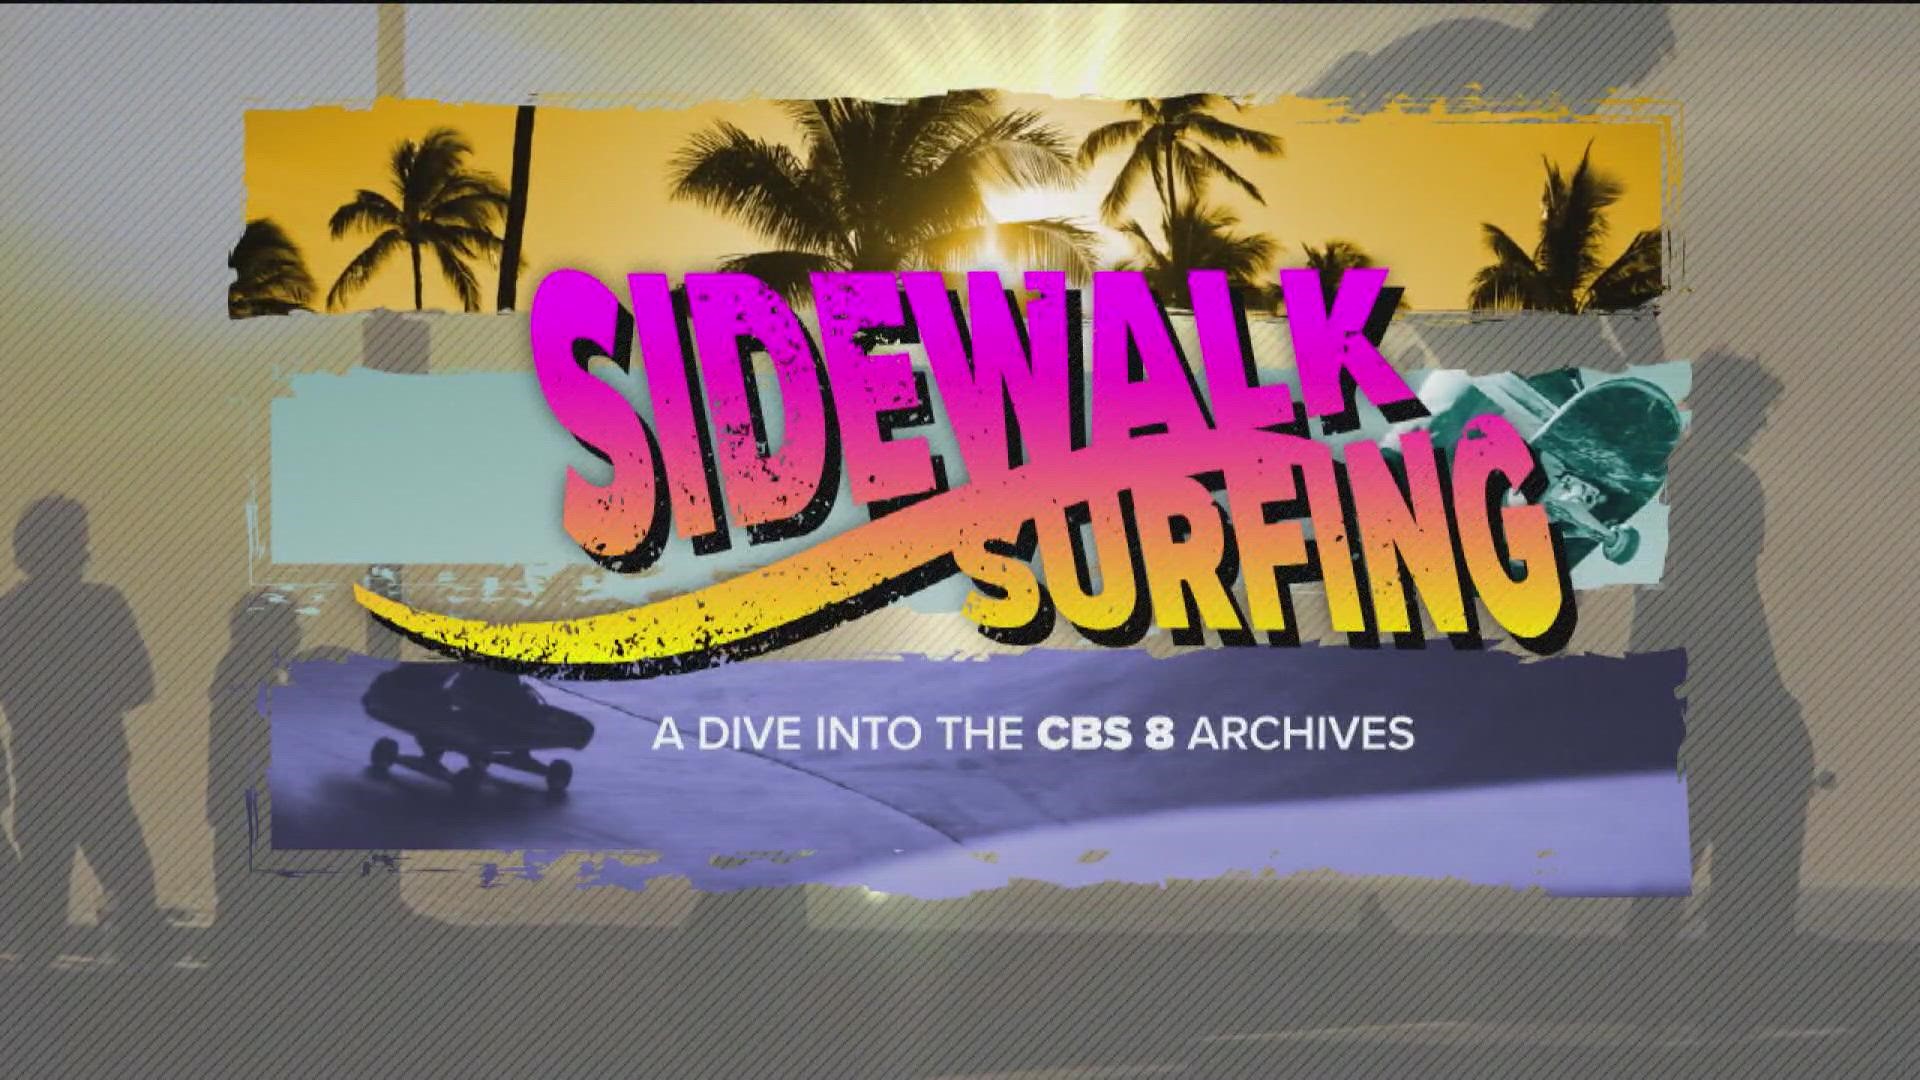 Sidewalk Surfing: A Dive into the CBS 8 archives on skateboarding and Tony Hawk.